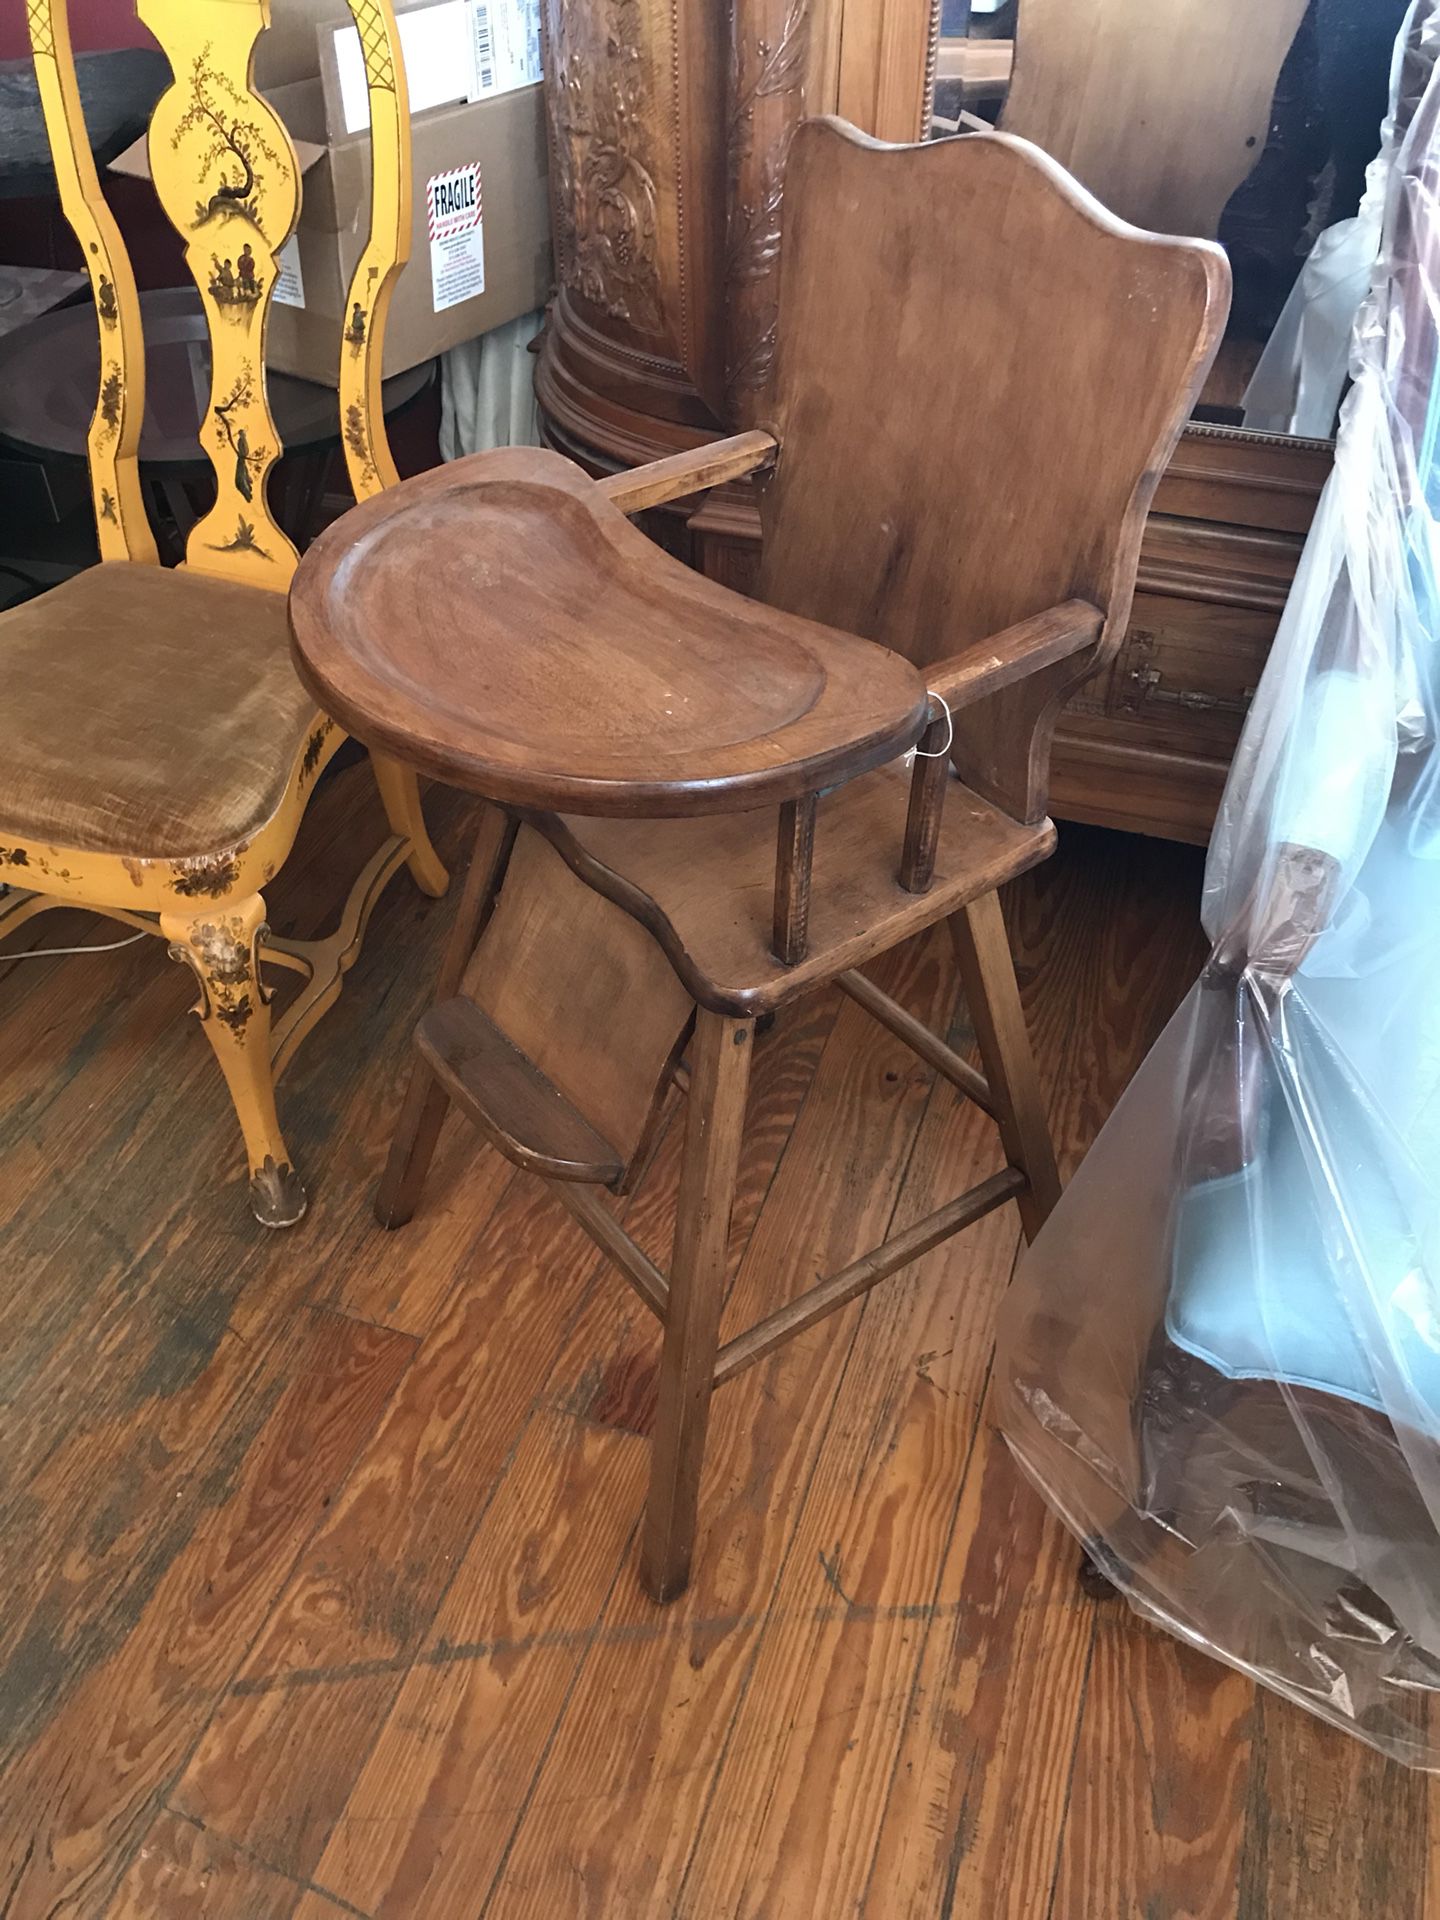 Antique baby high chair